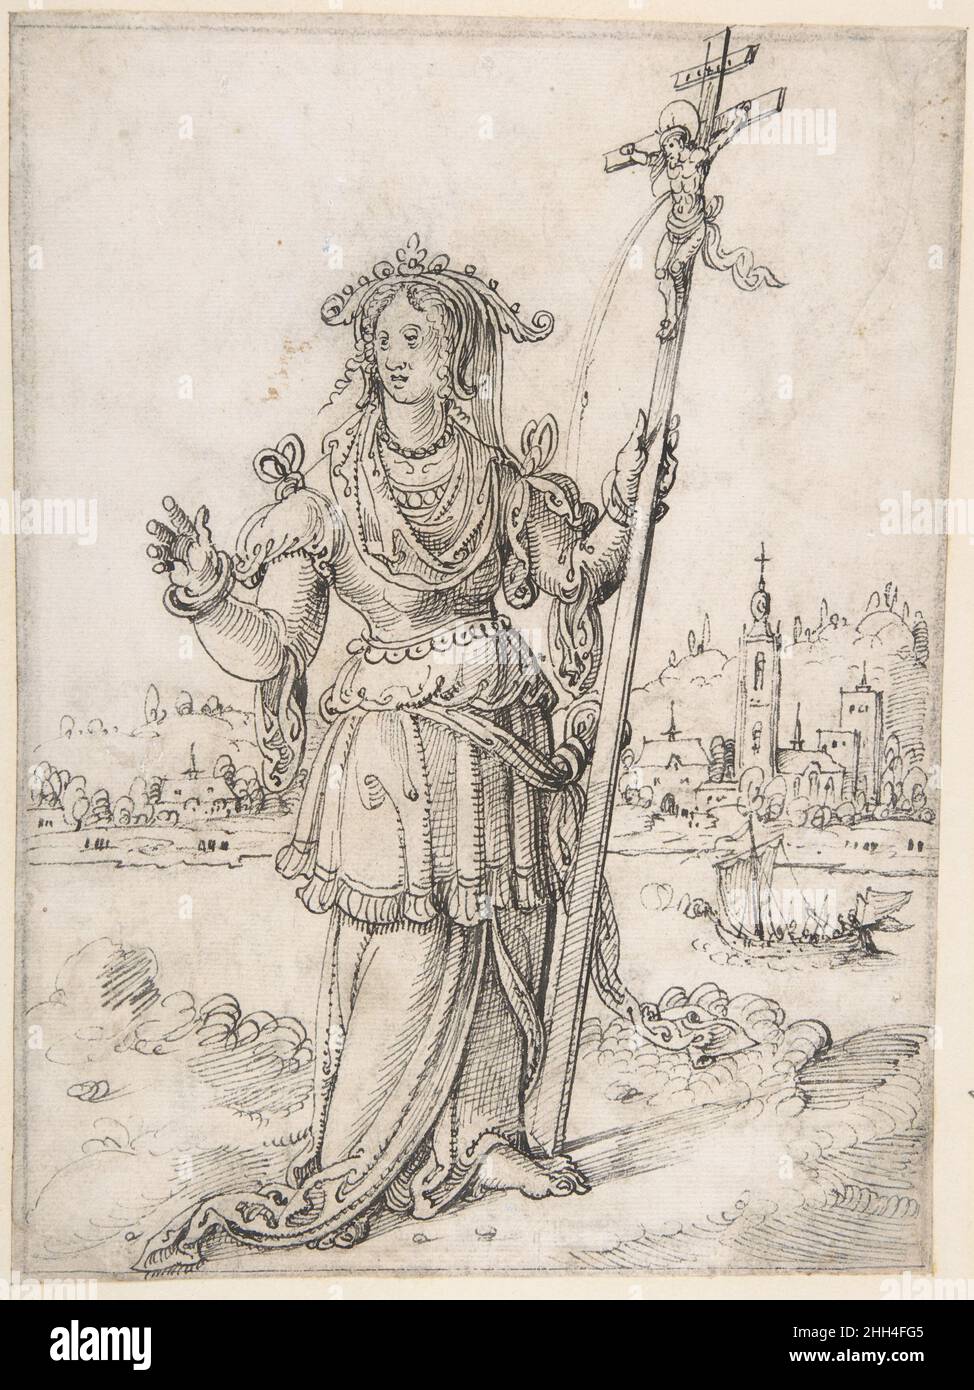 Allegorical Figure (Faith?) early 16th–mid 16th century Pieter Cornelisz Kunst Netherlandish. Allegorical Figure (Faith?)  381958 Artist: Pieter Cornelisz Kunst, Netherlandish, Leiden 1489/90?1560/61 Leiden, Allegorical Figure (Faith?), early 16th?mid 16th century, Pen and brown ink. Framing line in black chalk (left, right and upper edge) and pen and grey ink (lower edge), possibly by the artist., sheet: 9 5/16 x 6 3/4 in. (23.6 x 17.1 cm). The Metropolitan Museum of Art, New York. Harry G. Sperling Fund, 2008 (2008.376) Stock Photo